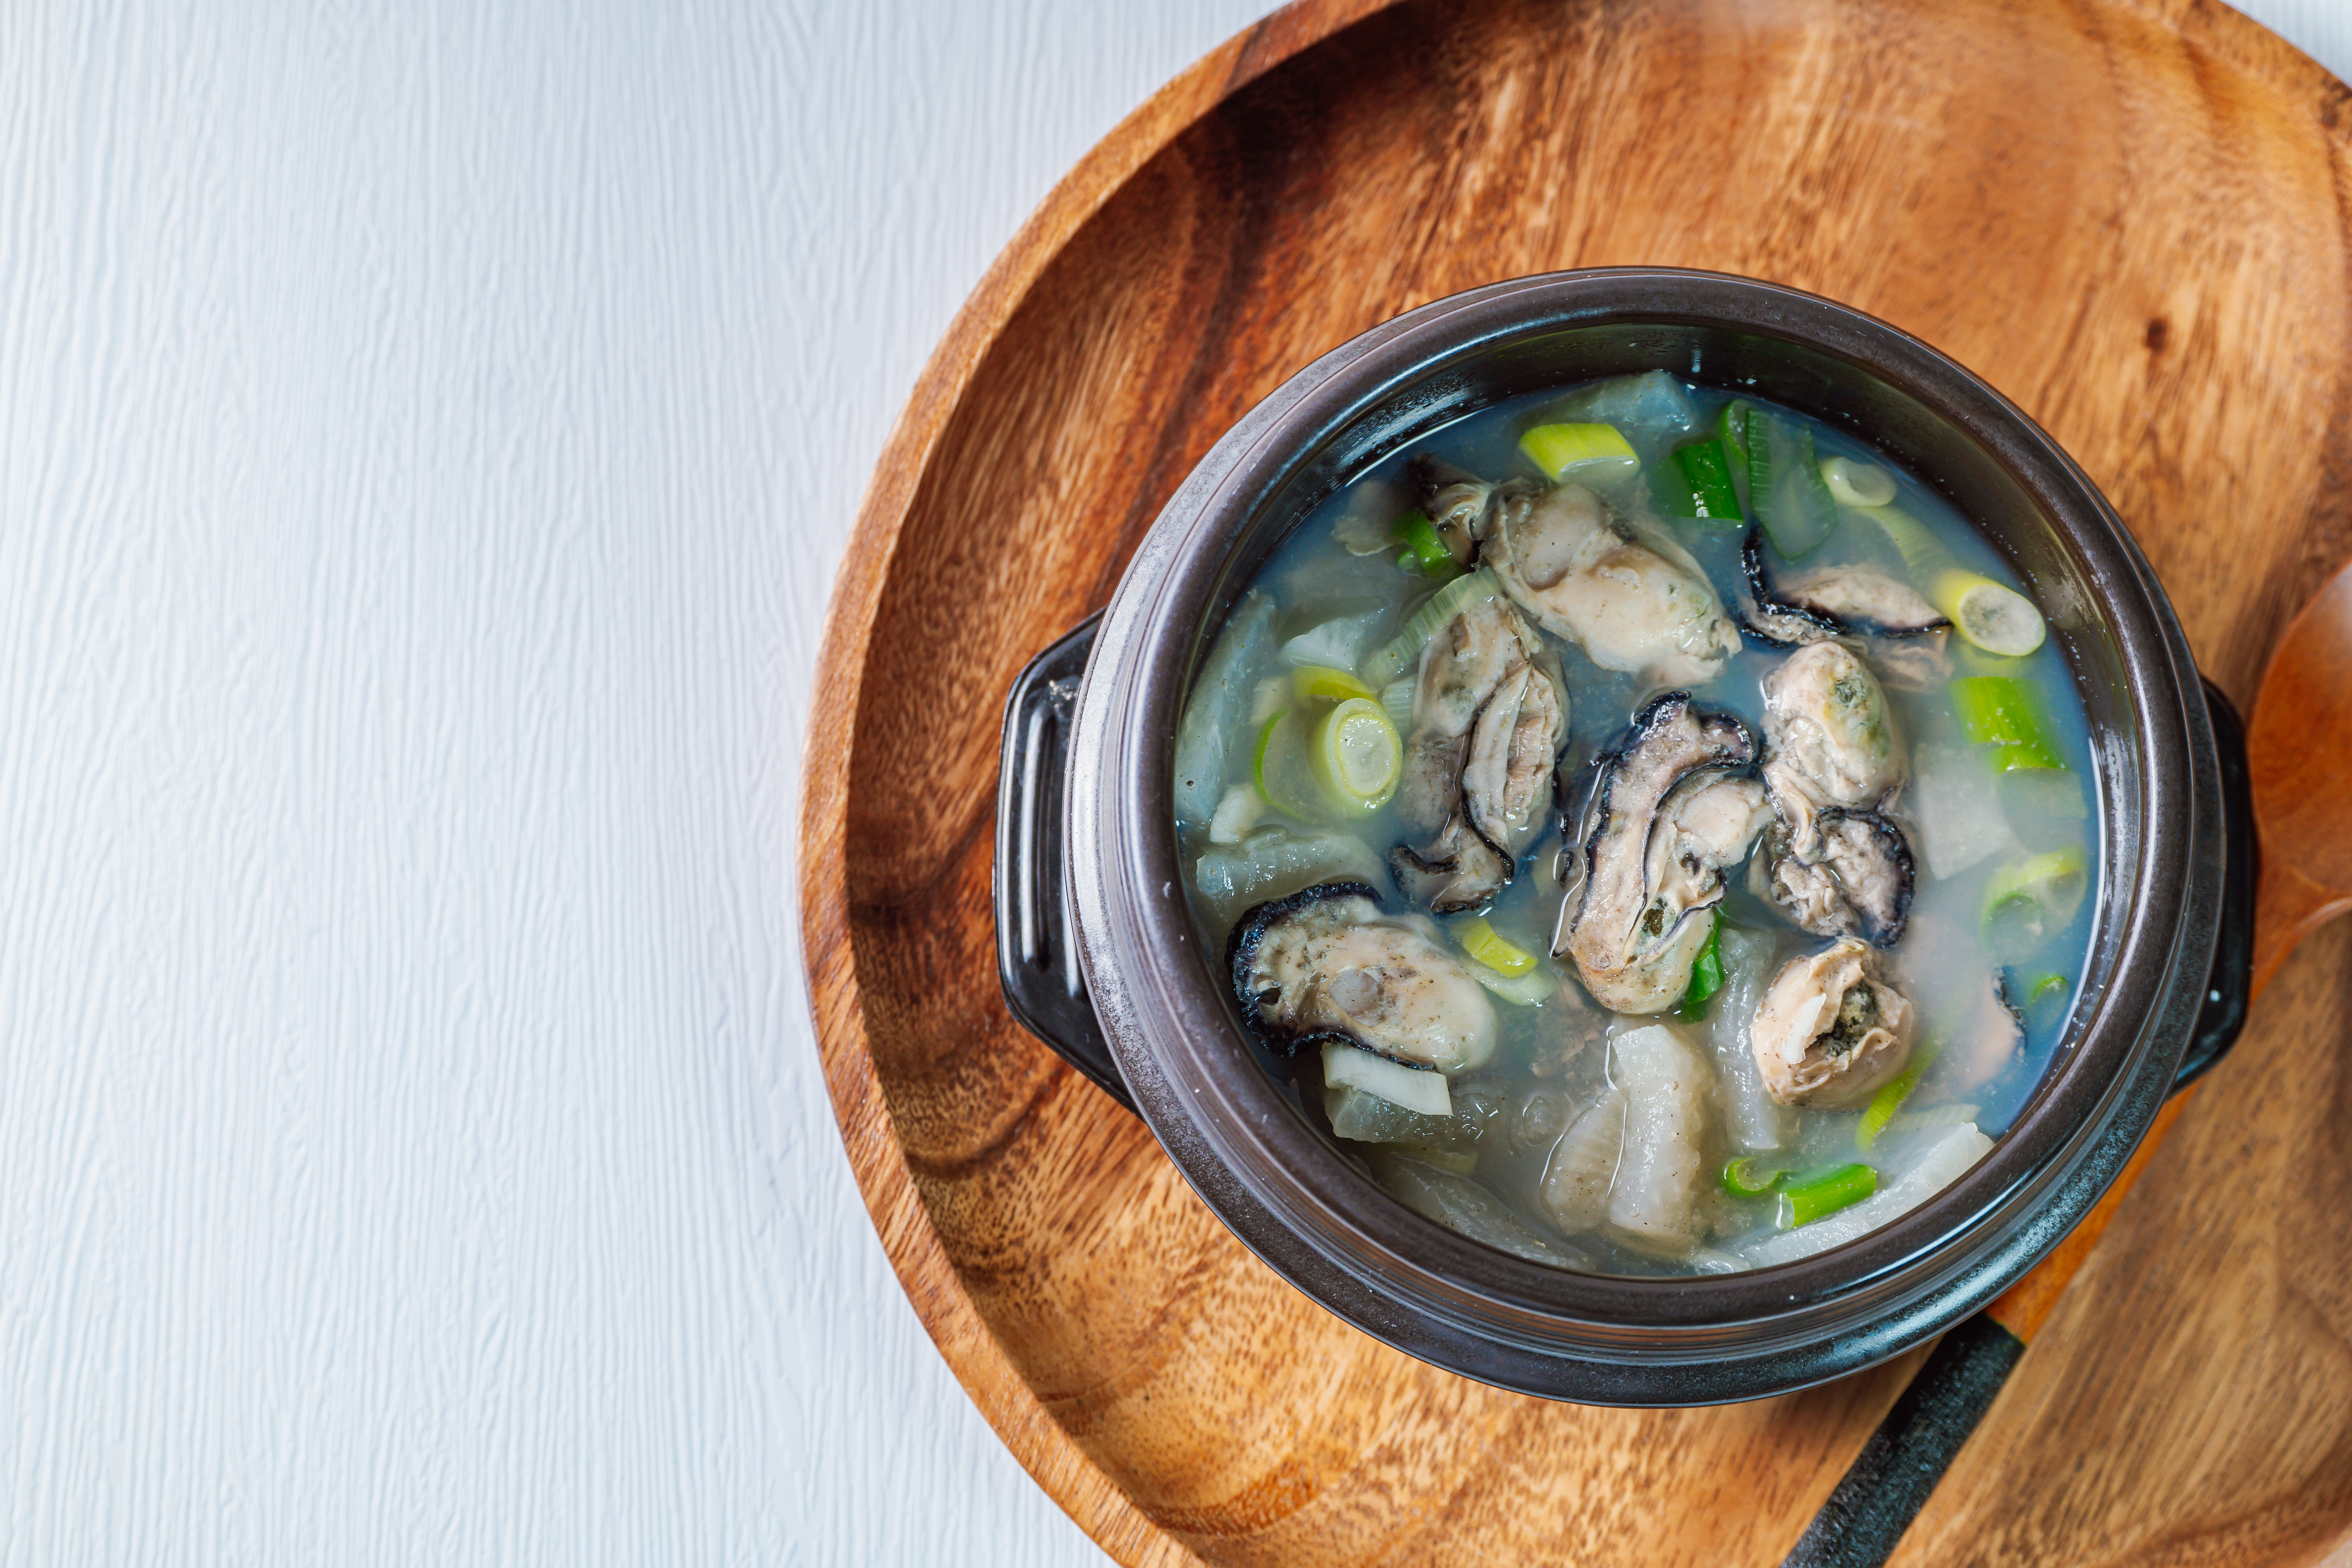 Gulguk, Korean style oyster soup : made by boiling fresh oysters with radish, bean curd, onion, anchovy, and mushroom. Add brown seaweed and chive to the soup to remove the fishy smell oysters are known for.